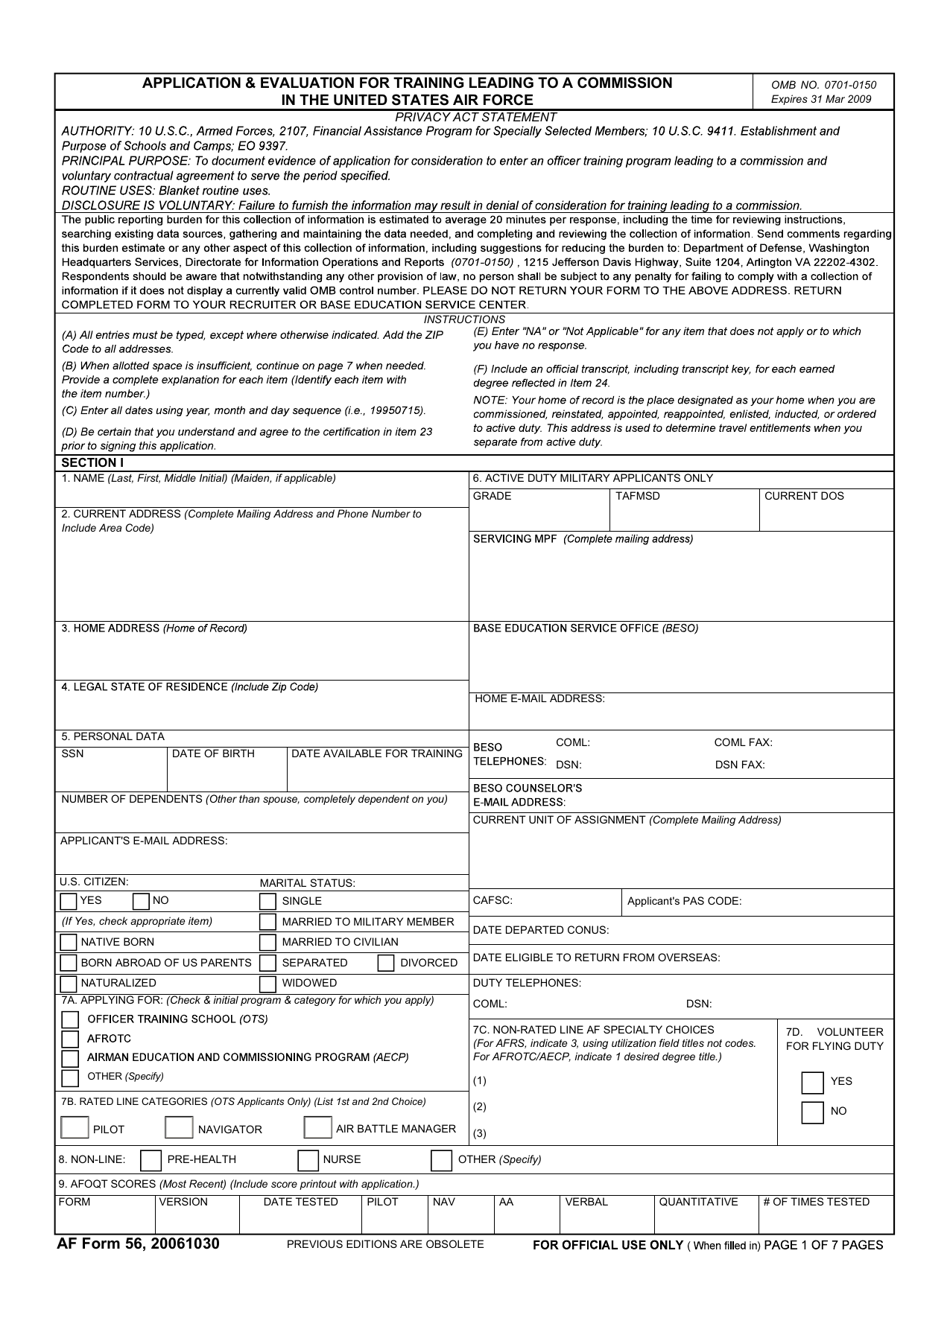 AF Form 56 Application  Evaluation for Training Leading to a Commission in the United States Air Force, Page 1